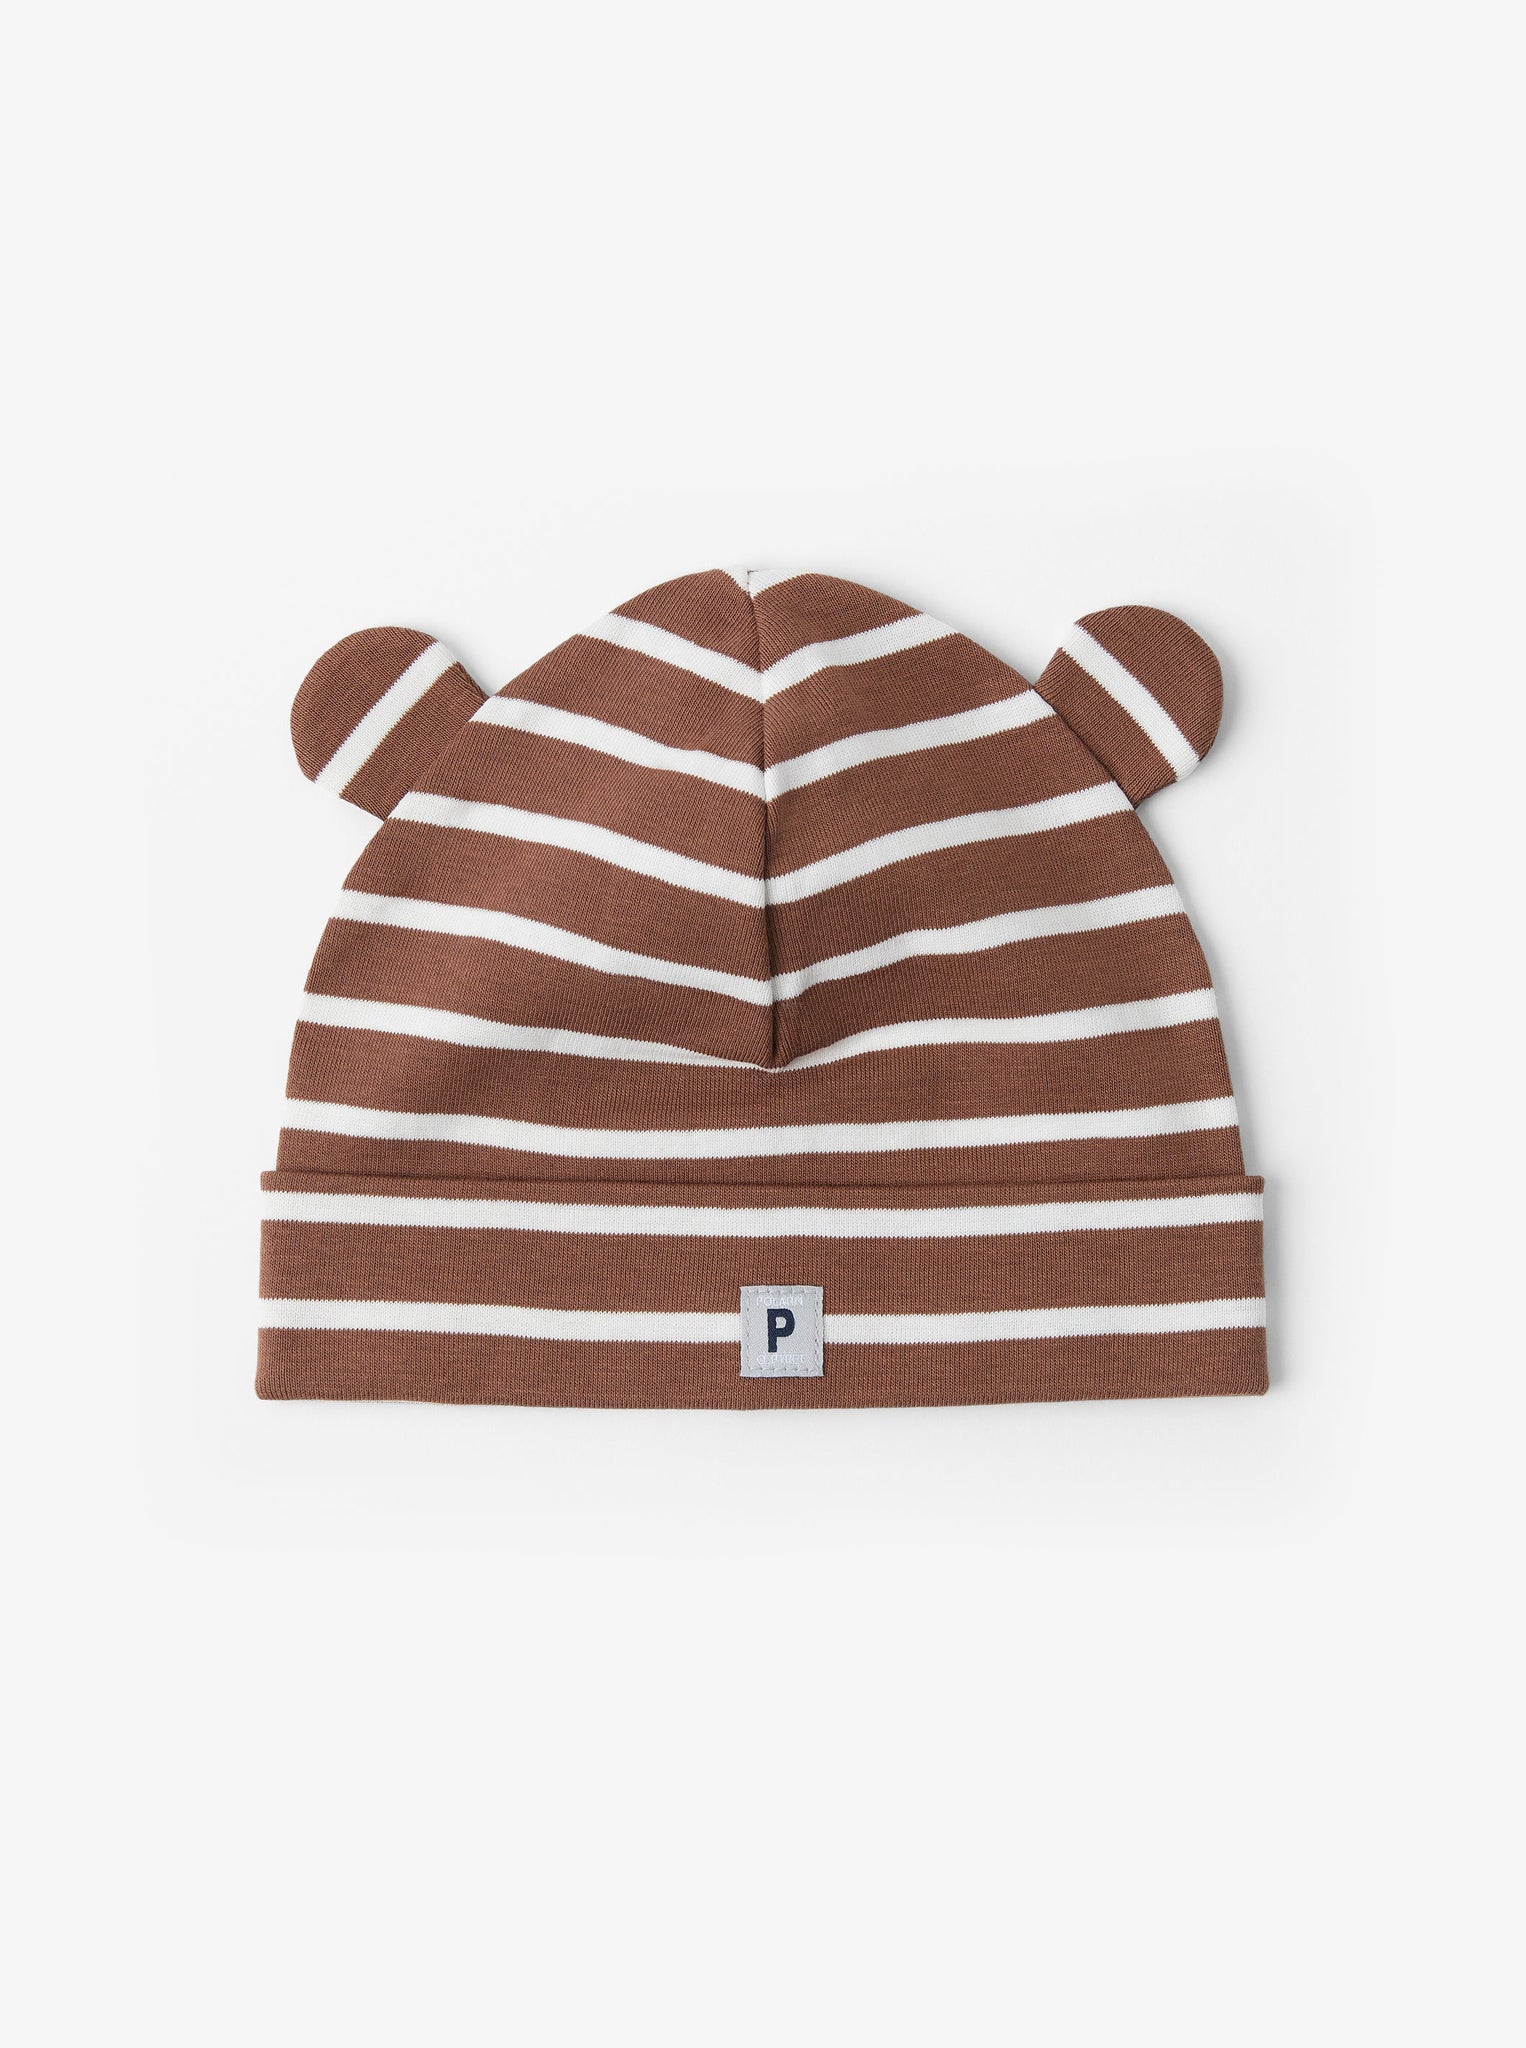 Organic Cotton Brown Baby Beanie Hat from the Polarn O. Pyret Kidswear collection. Nordic kids clothes made from sustainable sources.